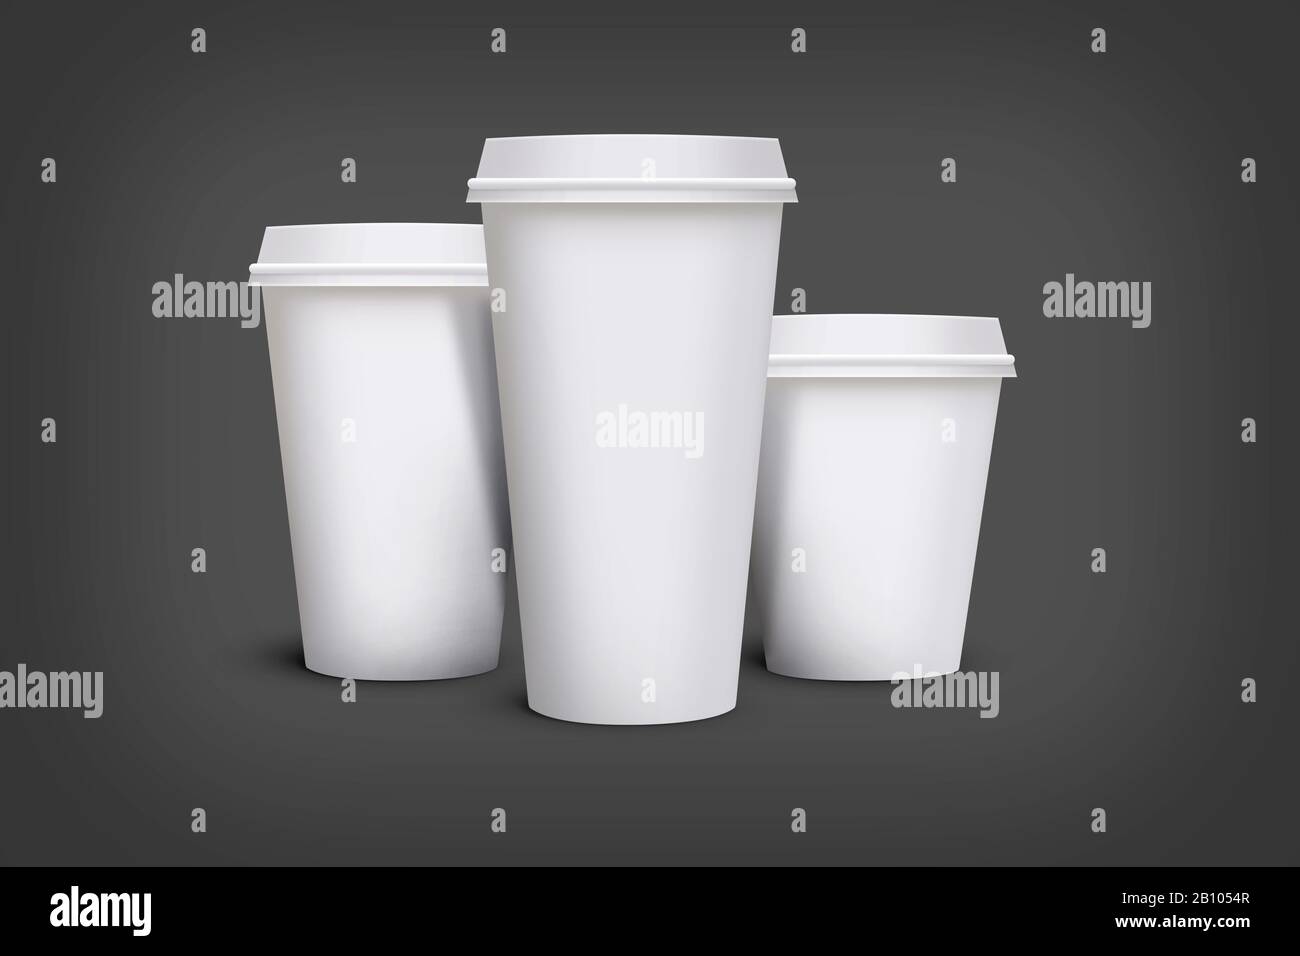 https://c8.alamy.com/comp/2B1054R/3d-illustration-of-white-blank-takeaway-paper-carton-or-cardboard-coffee-or-tea-cup-in-different-size-on-isolated-white-background-for-presentation-2B1054R.jpg